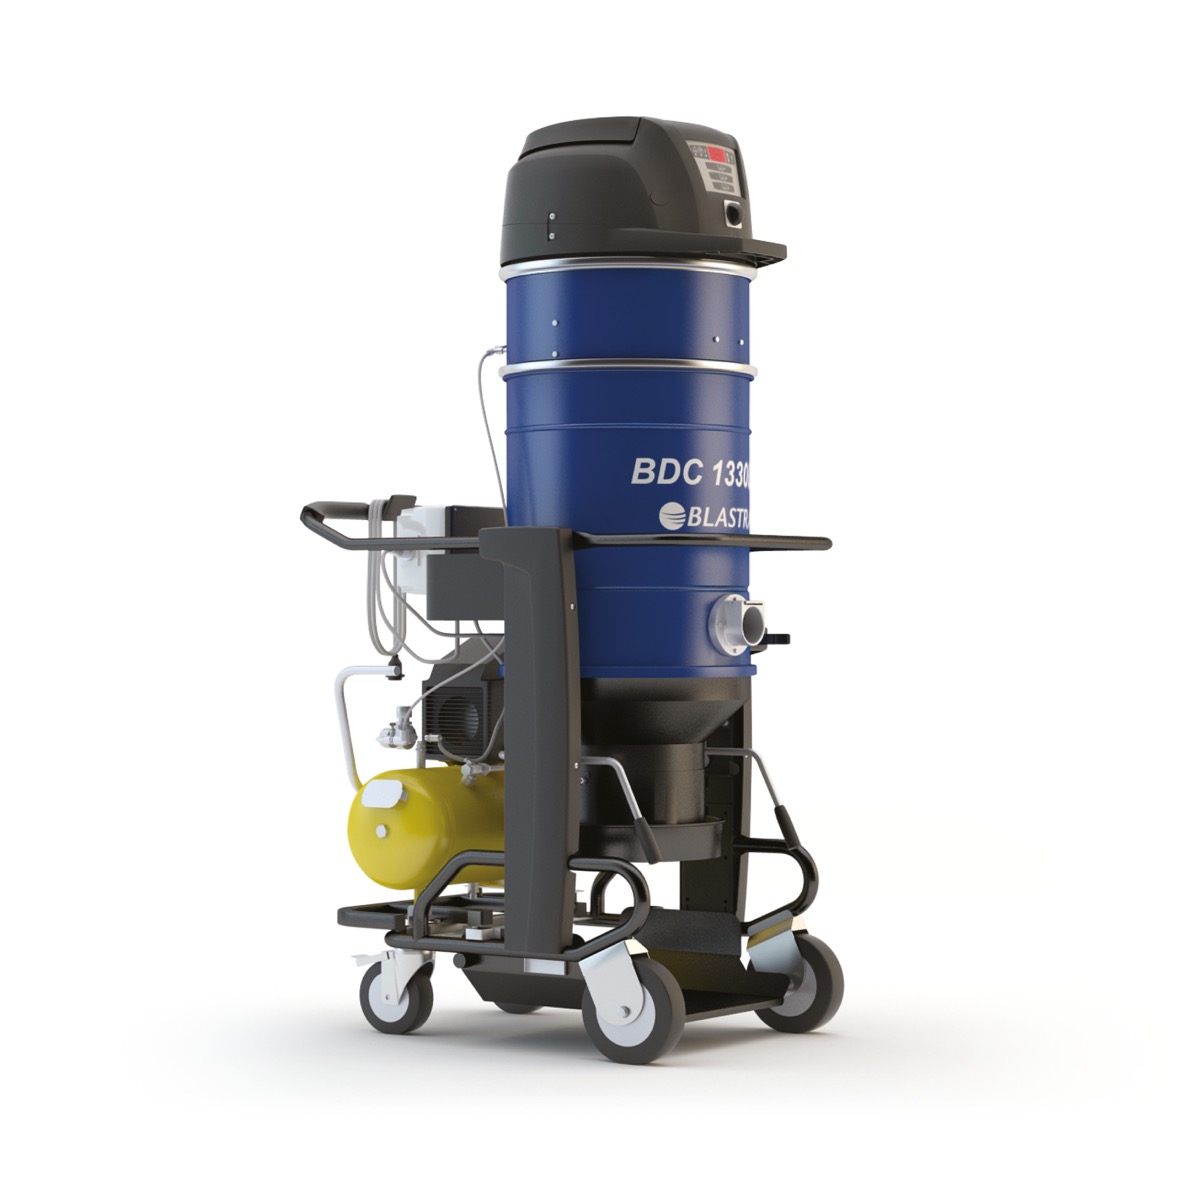 Blastrac Dust Collector 1330 available to hire from Speedcrete, United Kingdom.